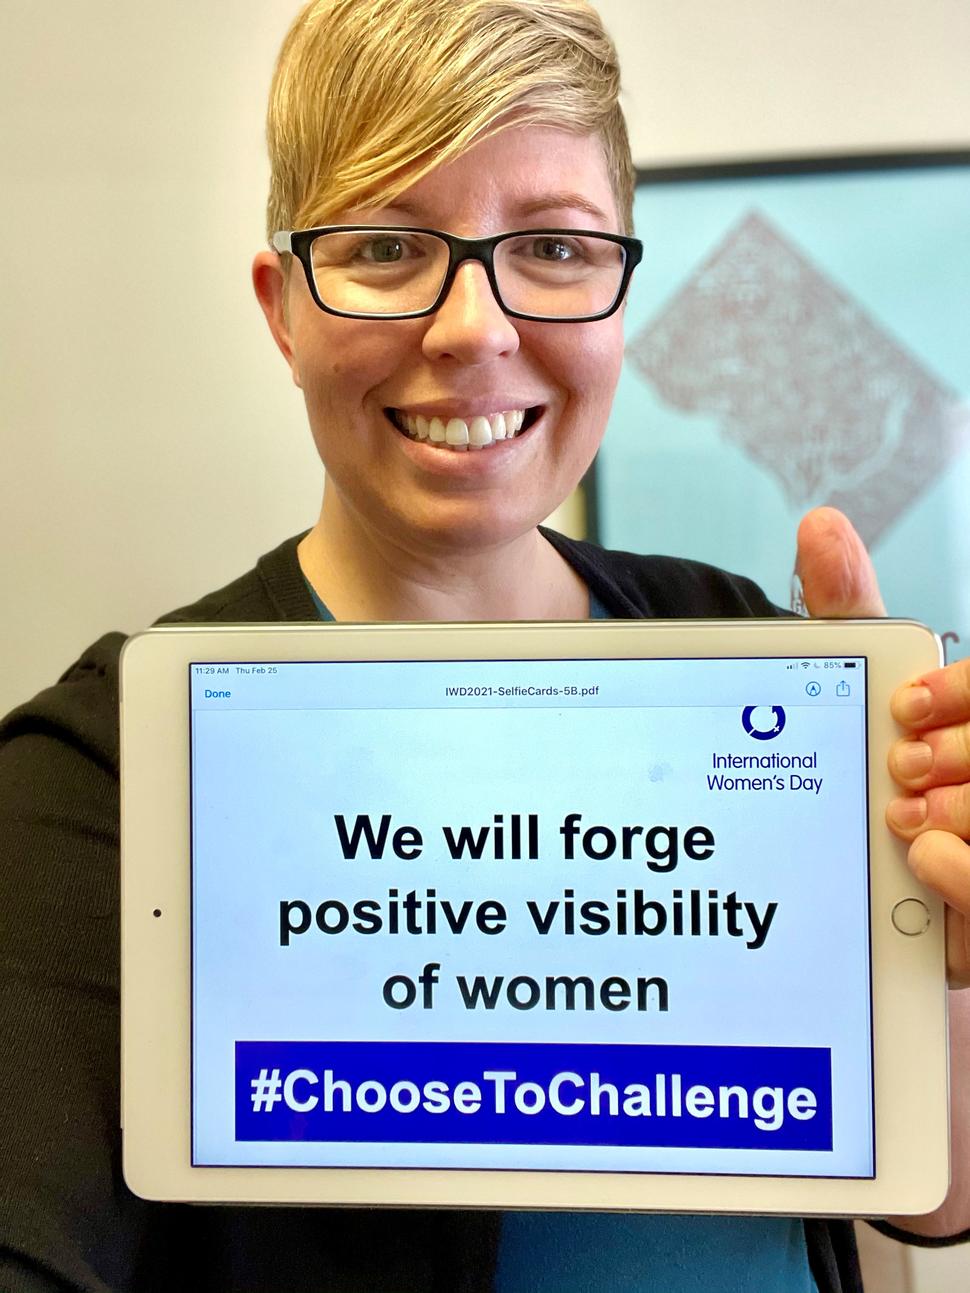 Kalina Duncan, MPH, DrPH (c) poses with sign "we will forge positive visibility in women" for International Women's Day 2021